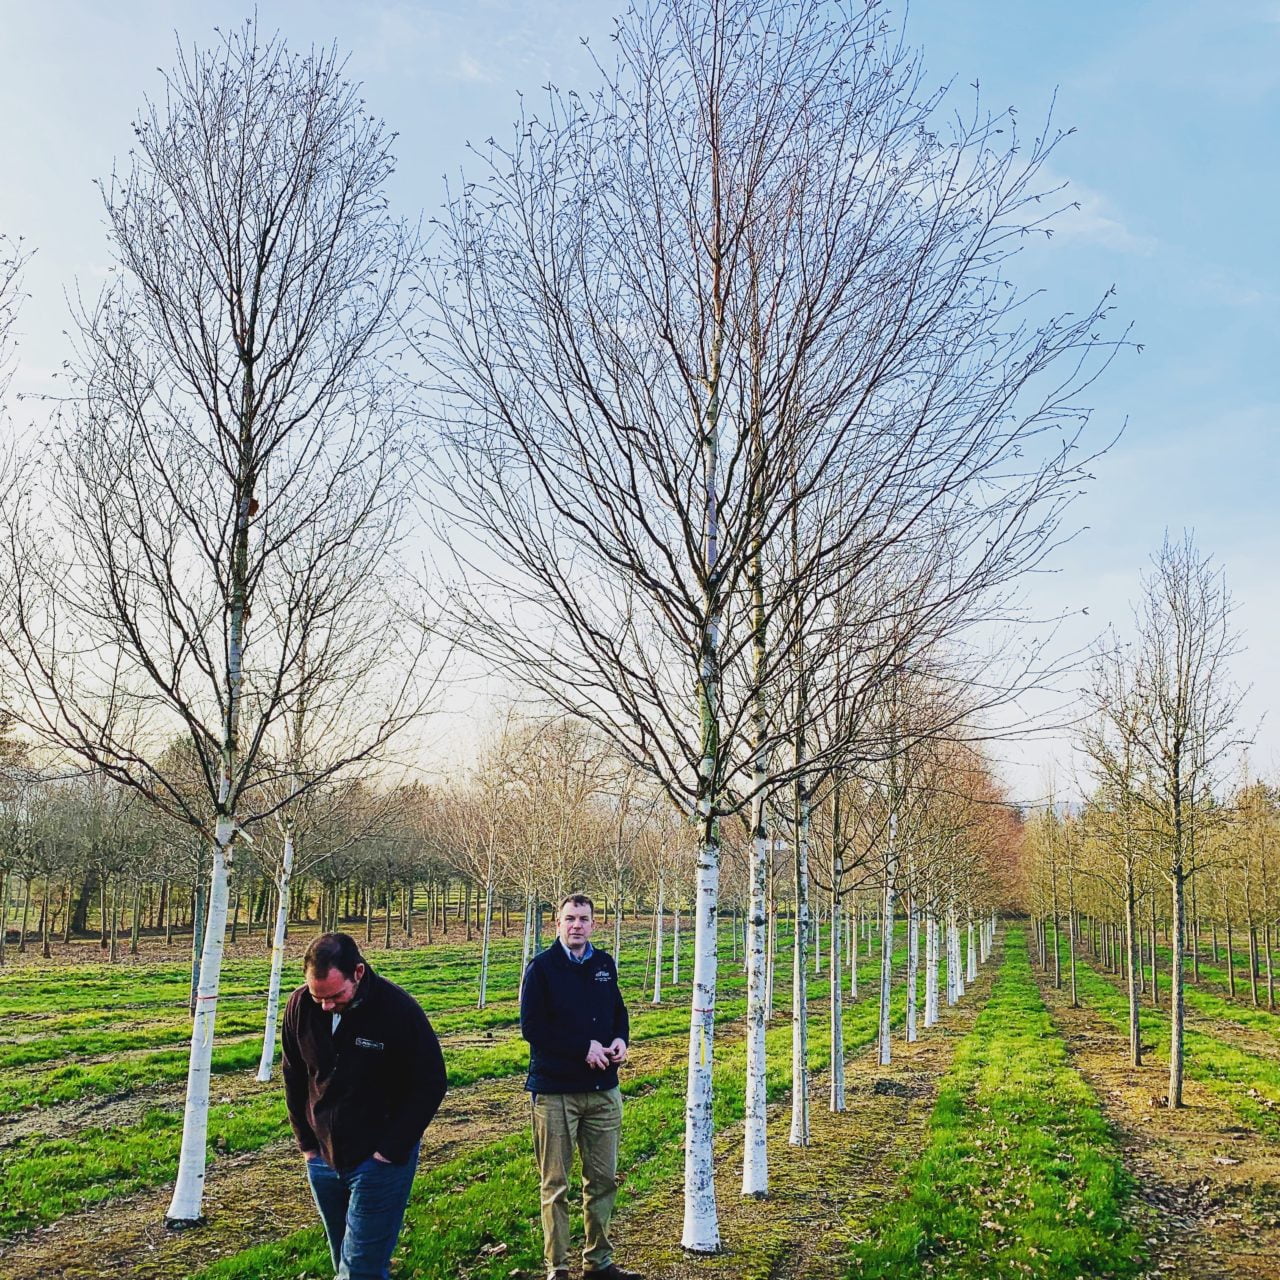 Choosing trees at Hilliers - this time for our own garden